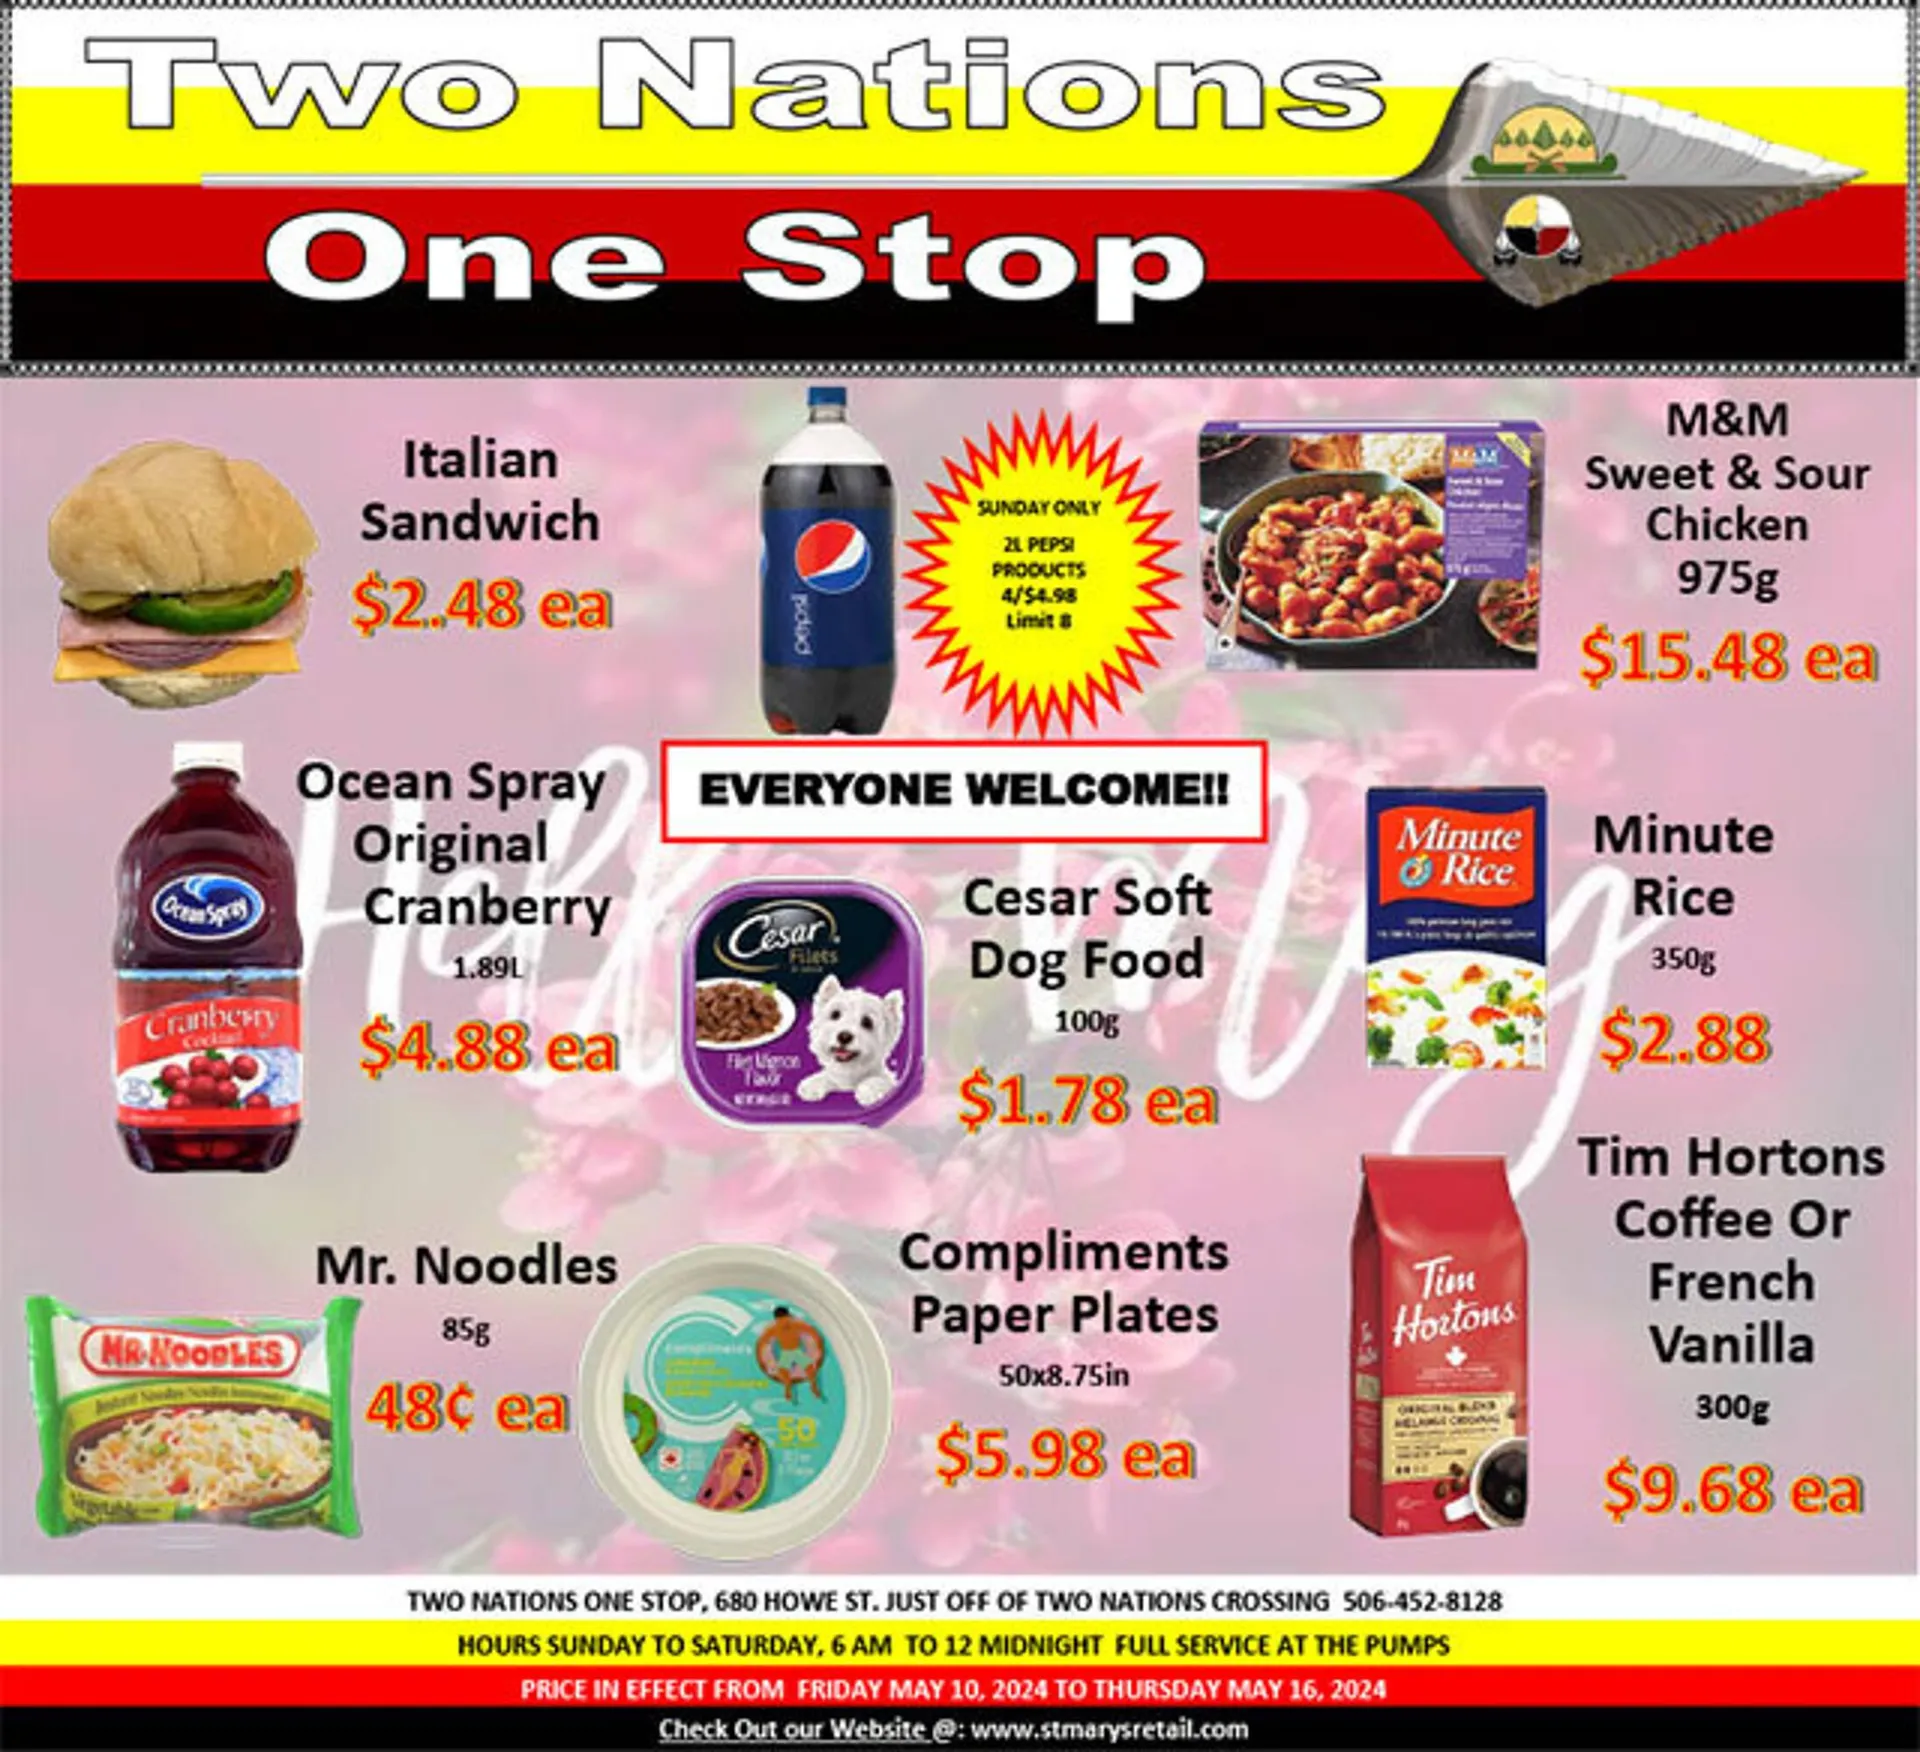 Two Nations One Stop flyer - 1